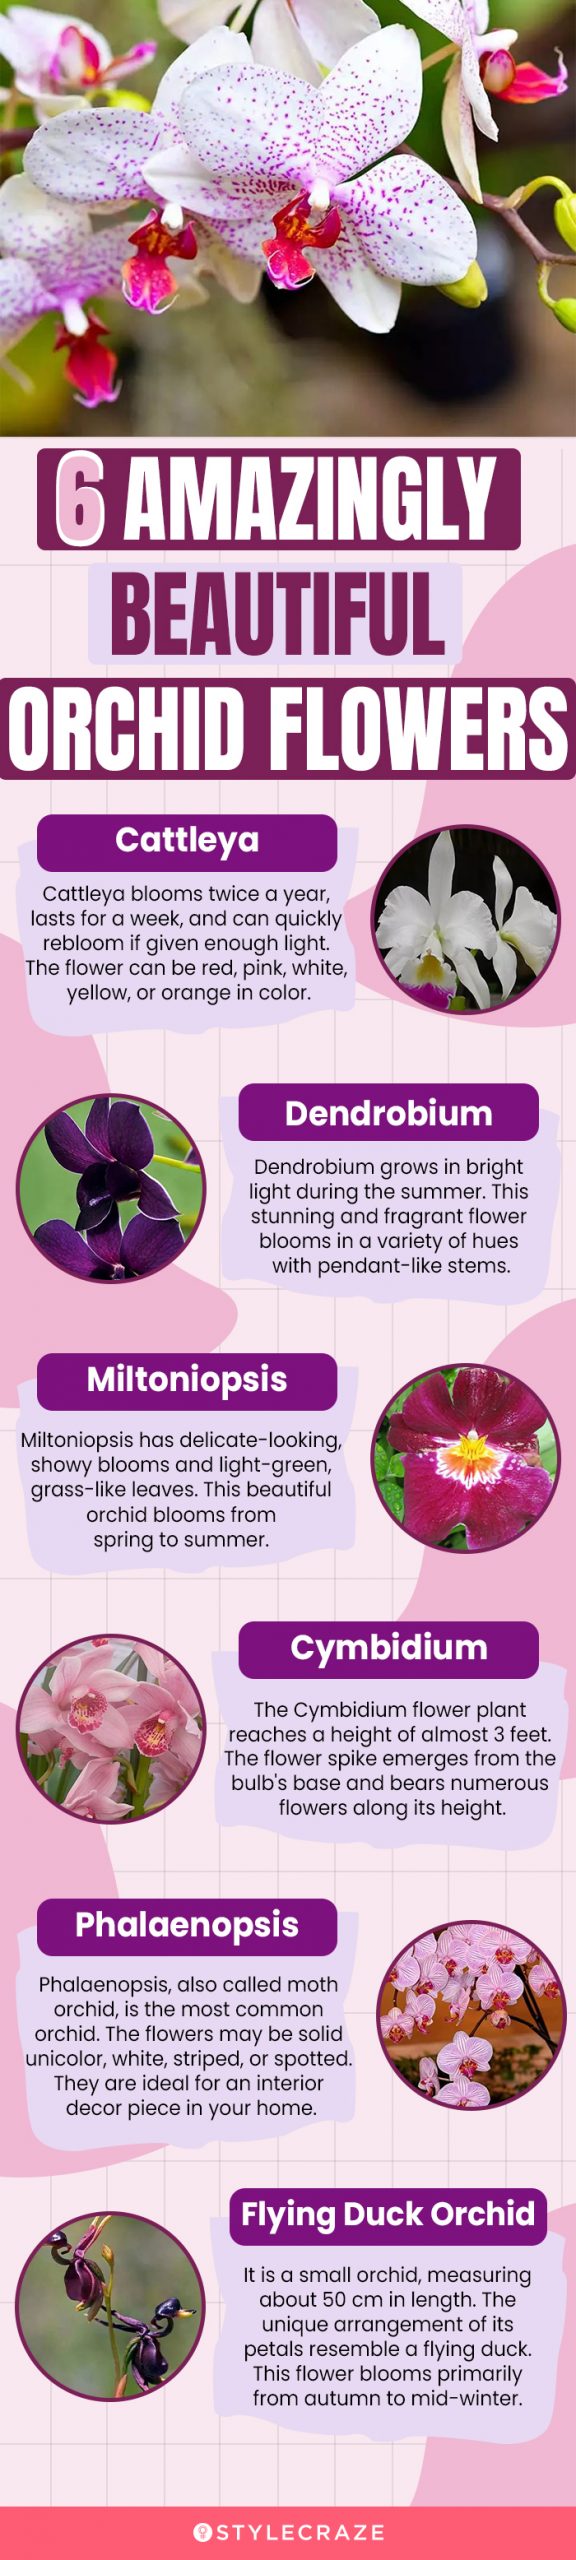 6 amazingly beautiful orchid flowers(infographic)